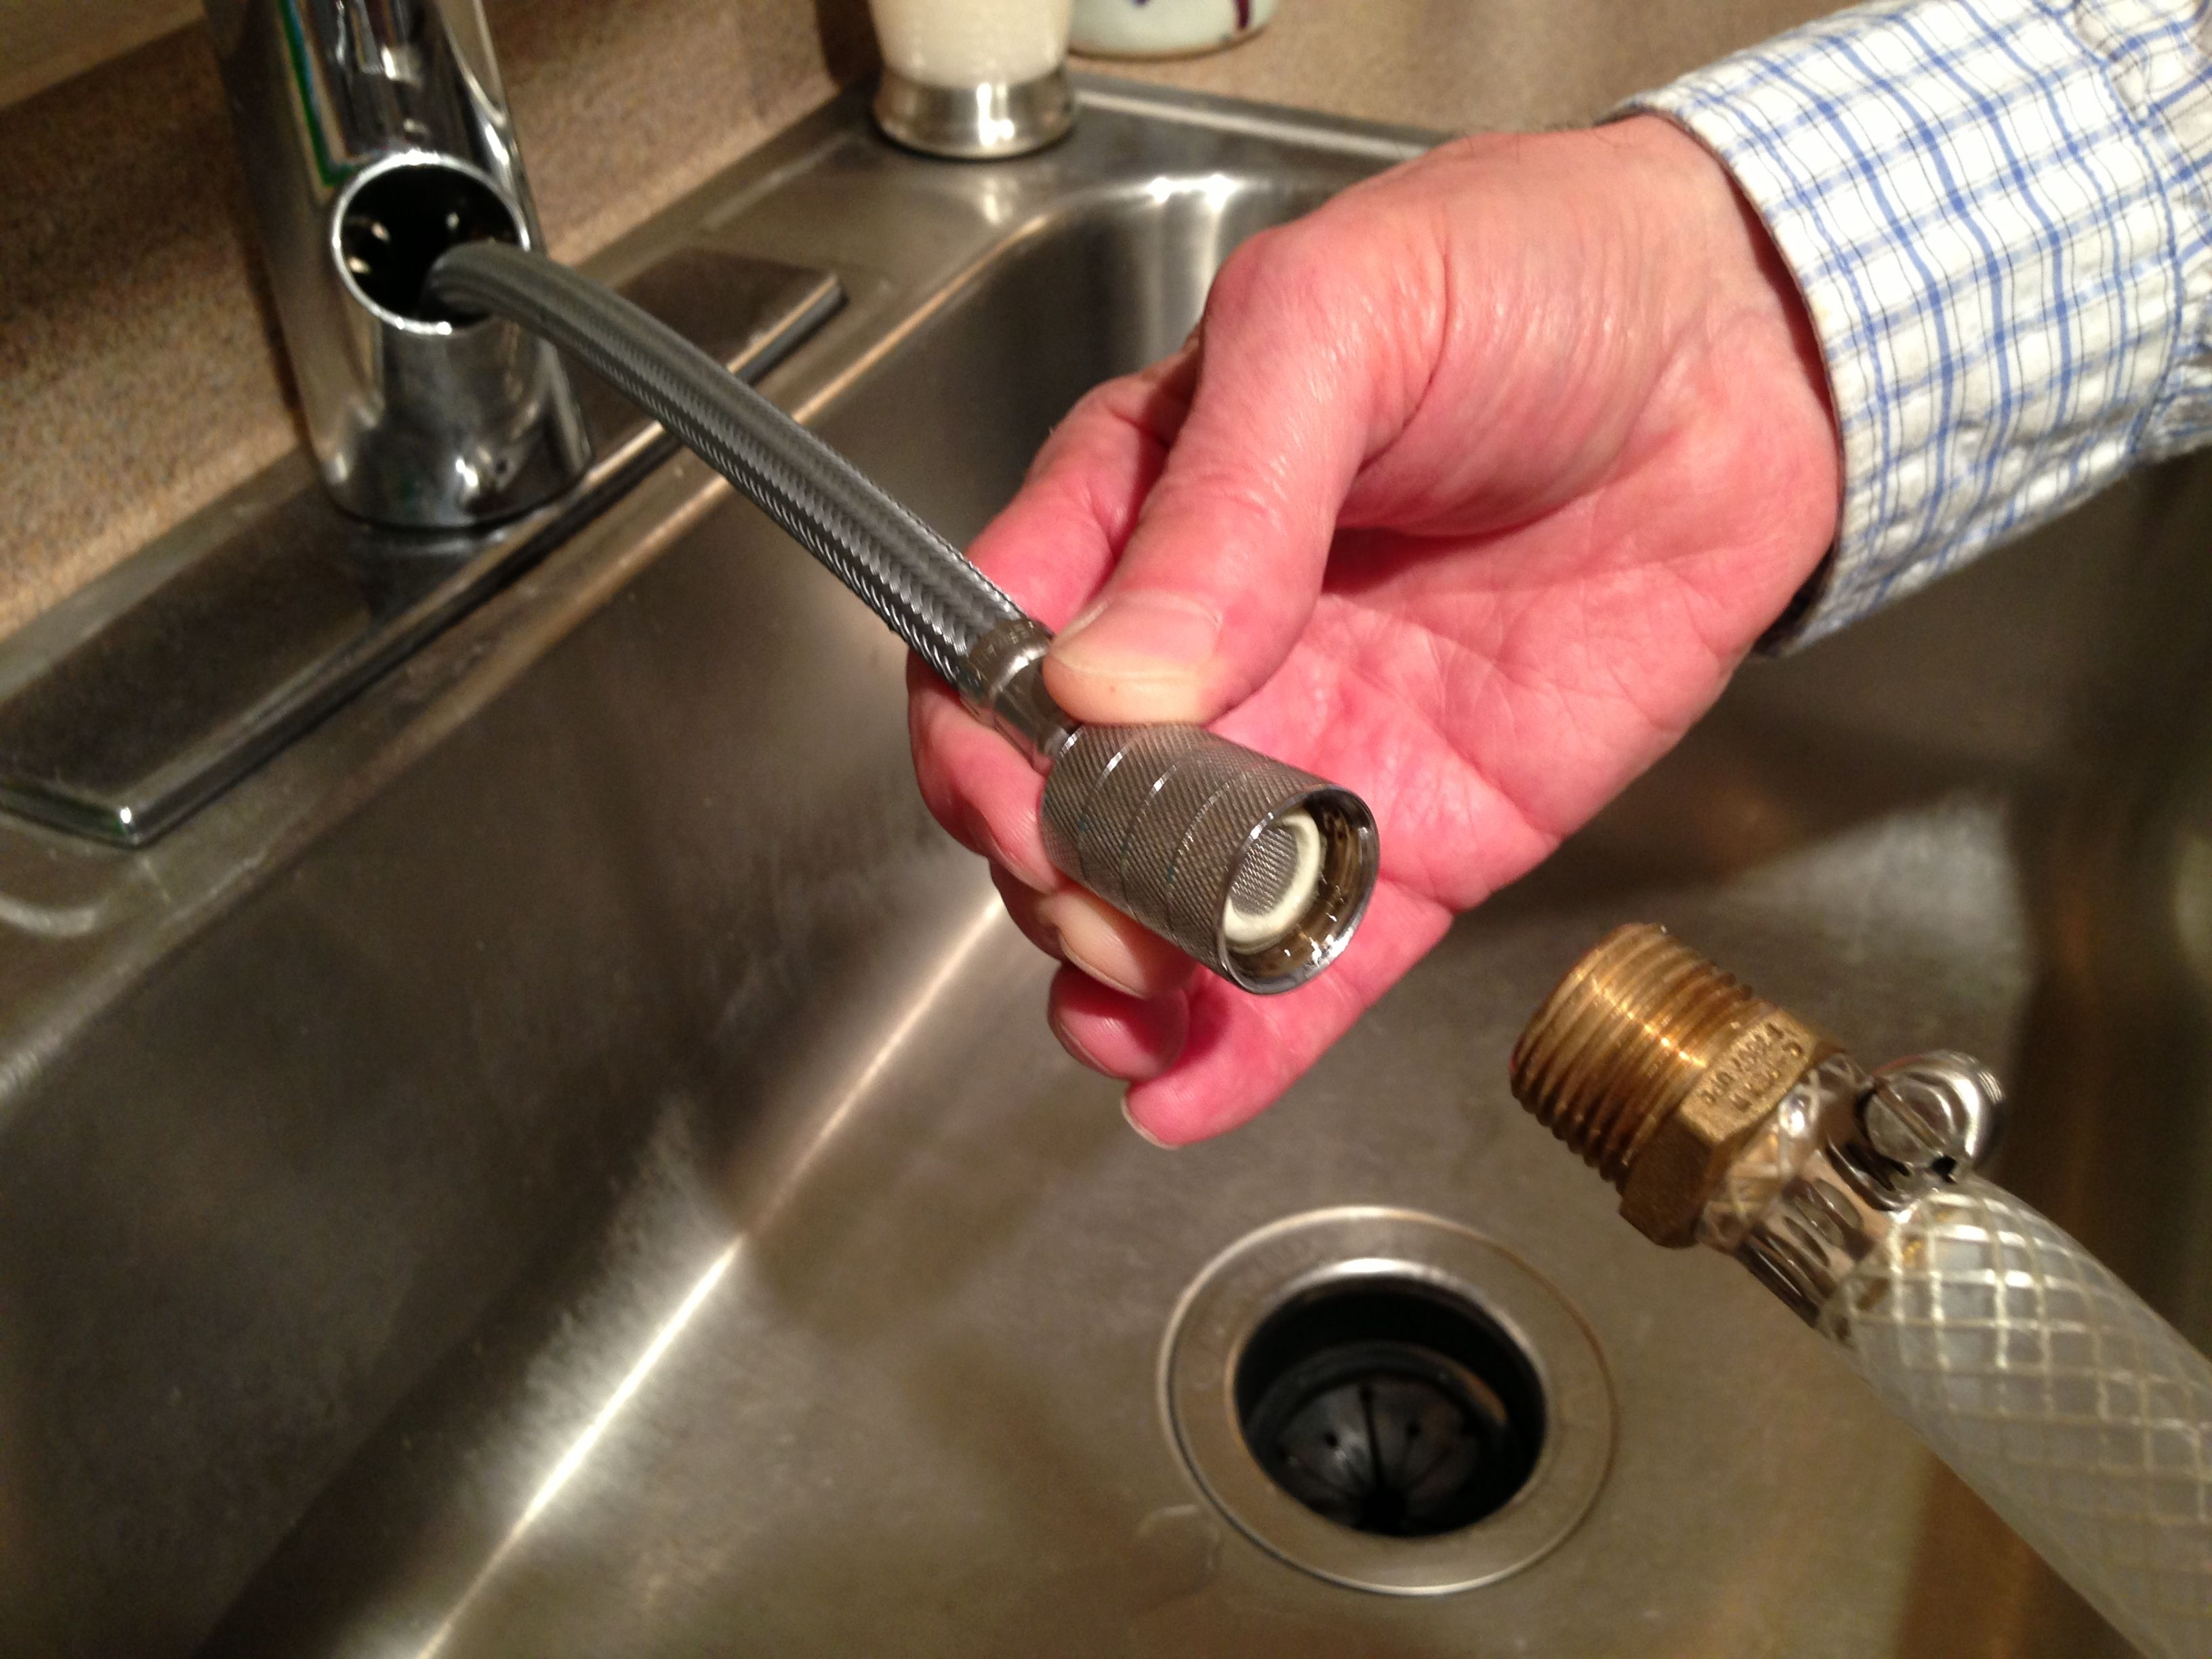 water hose that connects to kitchen sink